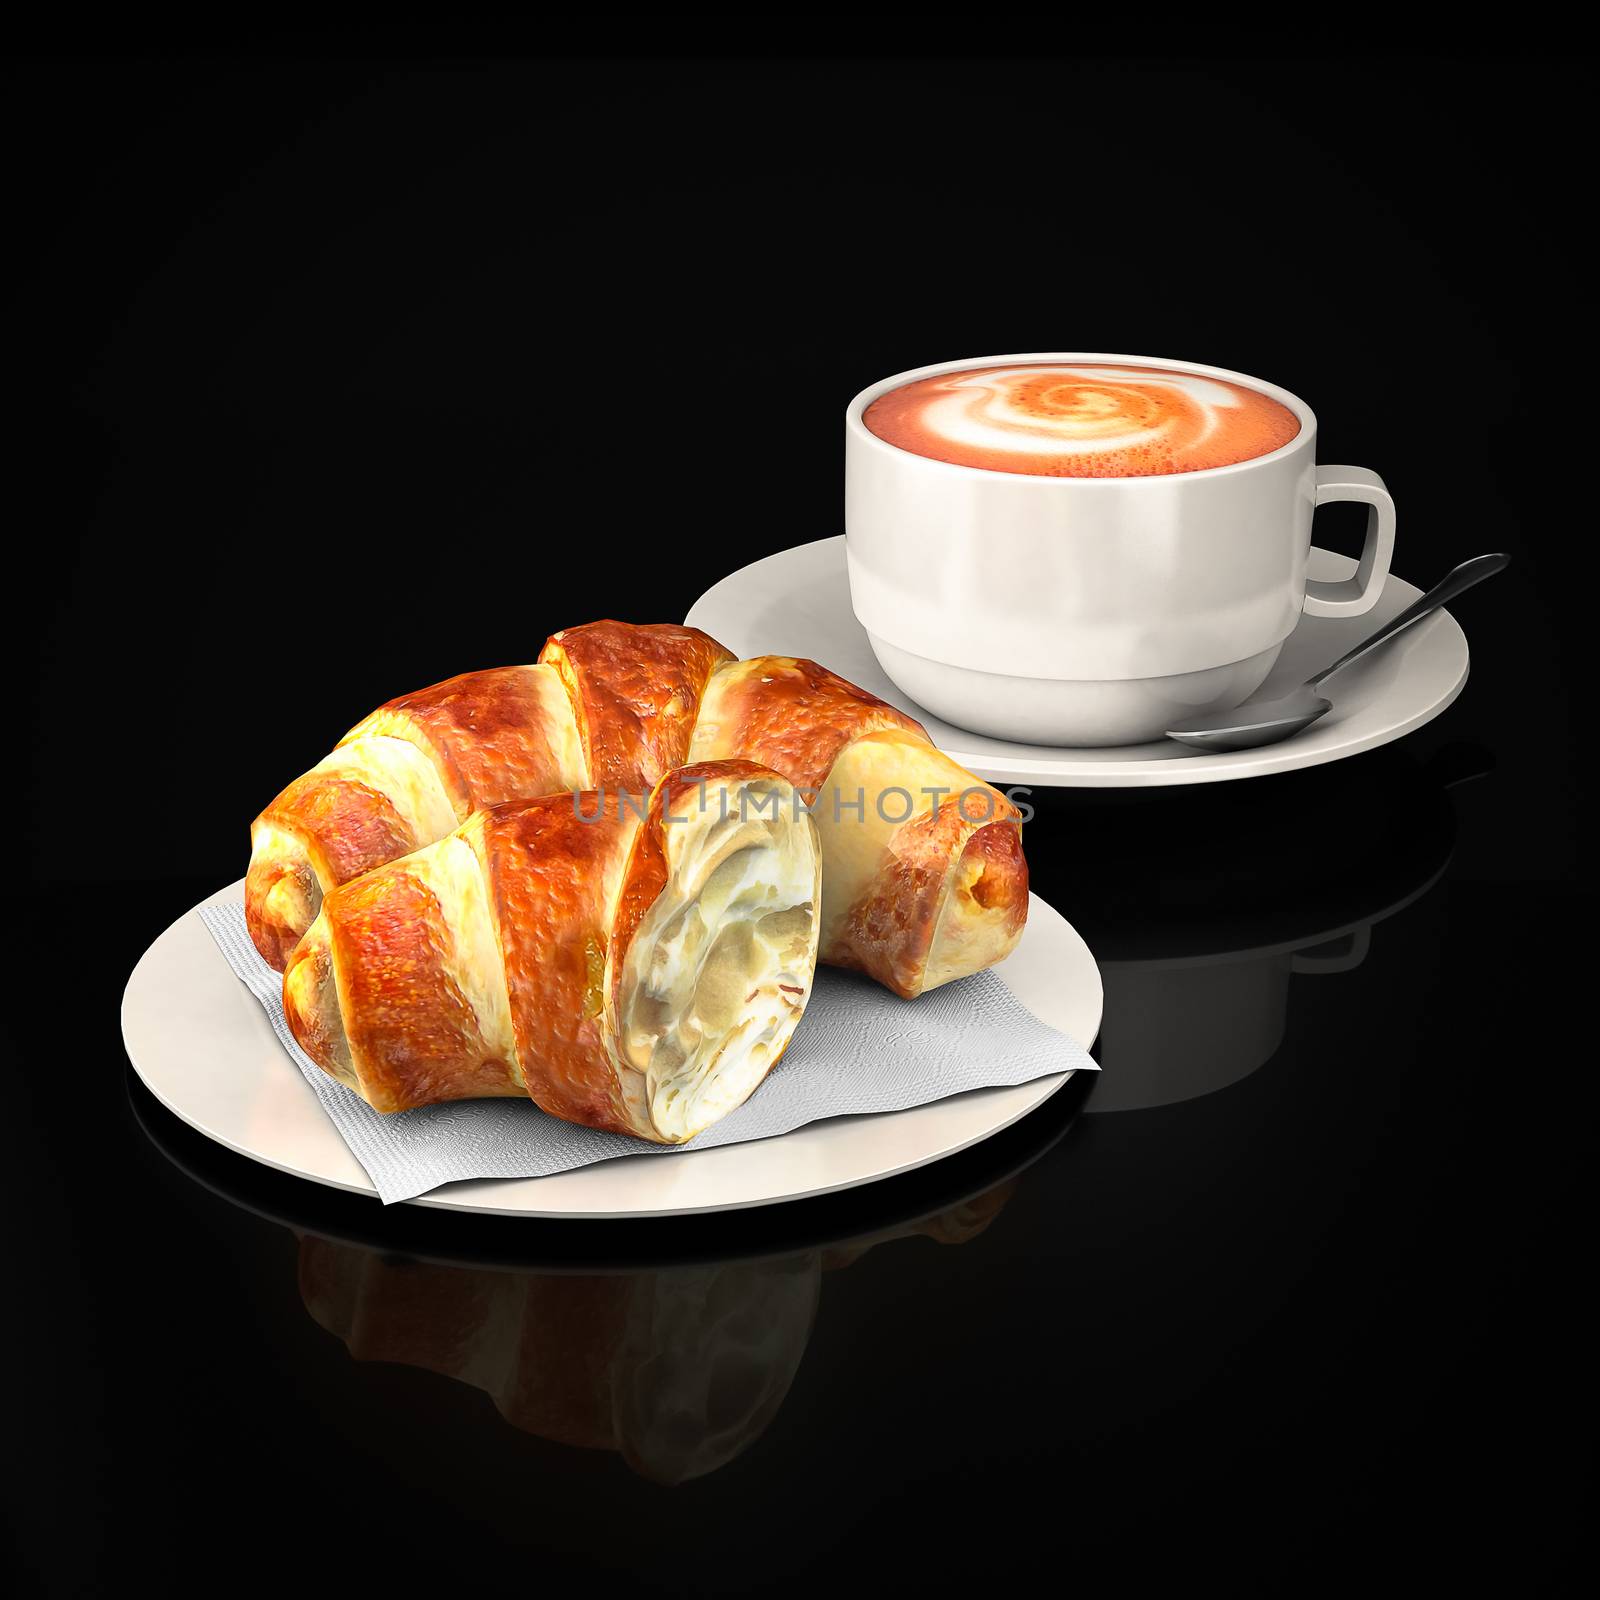 Croissants and coffee cup on a black background